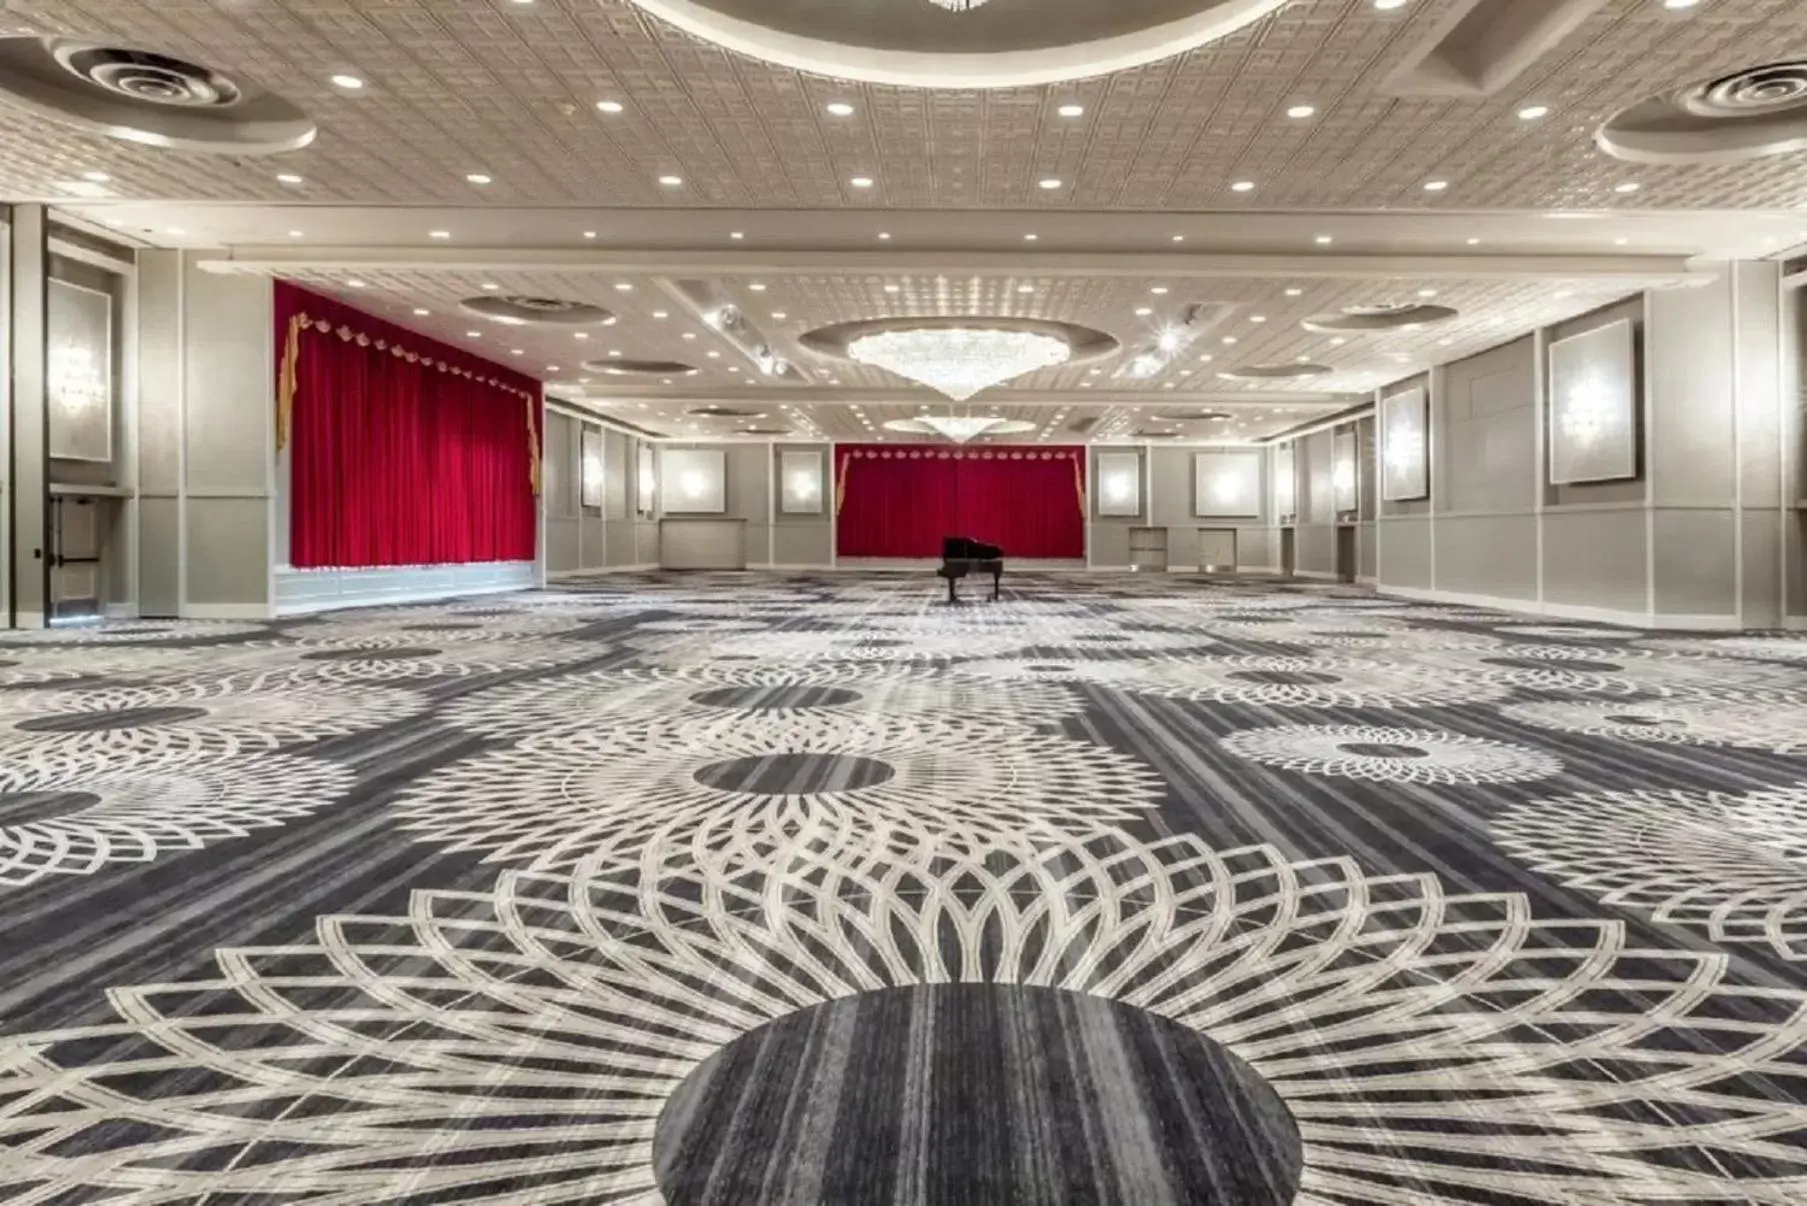 Banquet/Function facilities, Banquet Facilities in Wyndham Houston near NRG Park - Medical Center